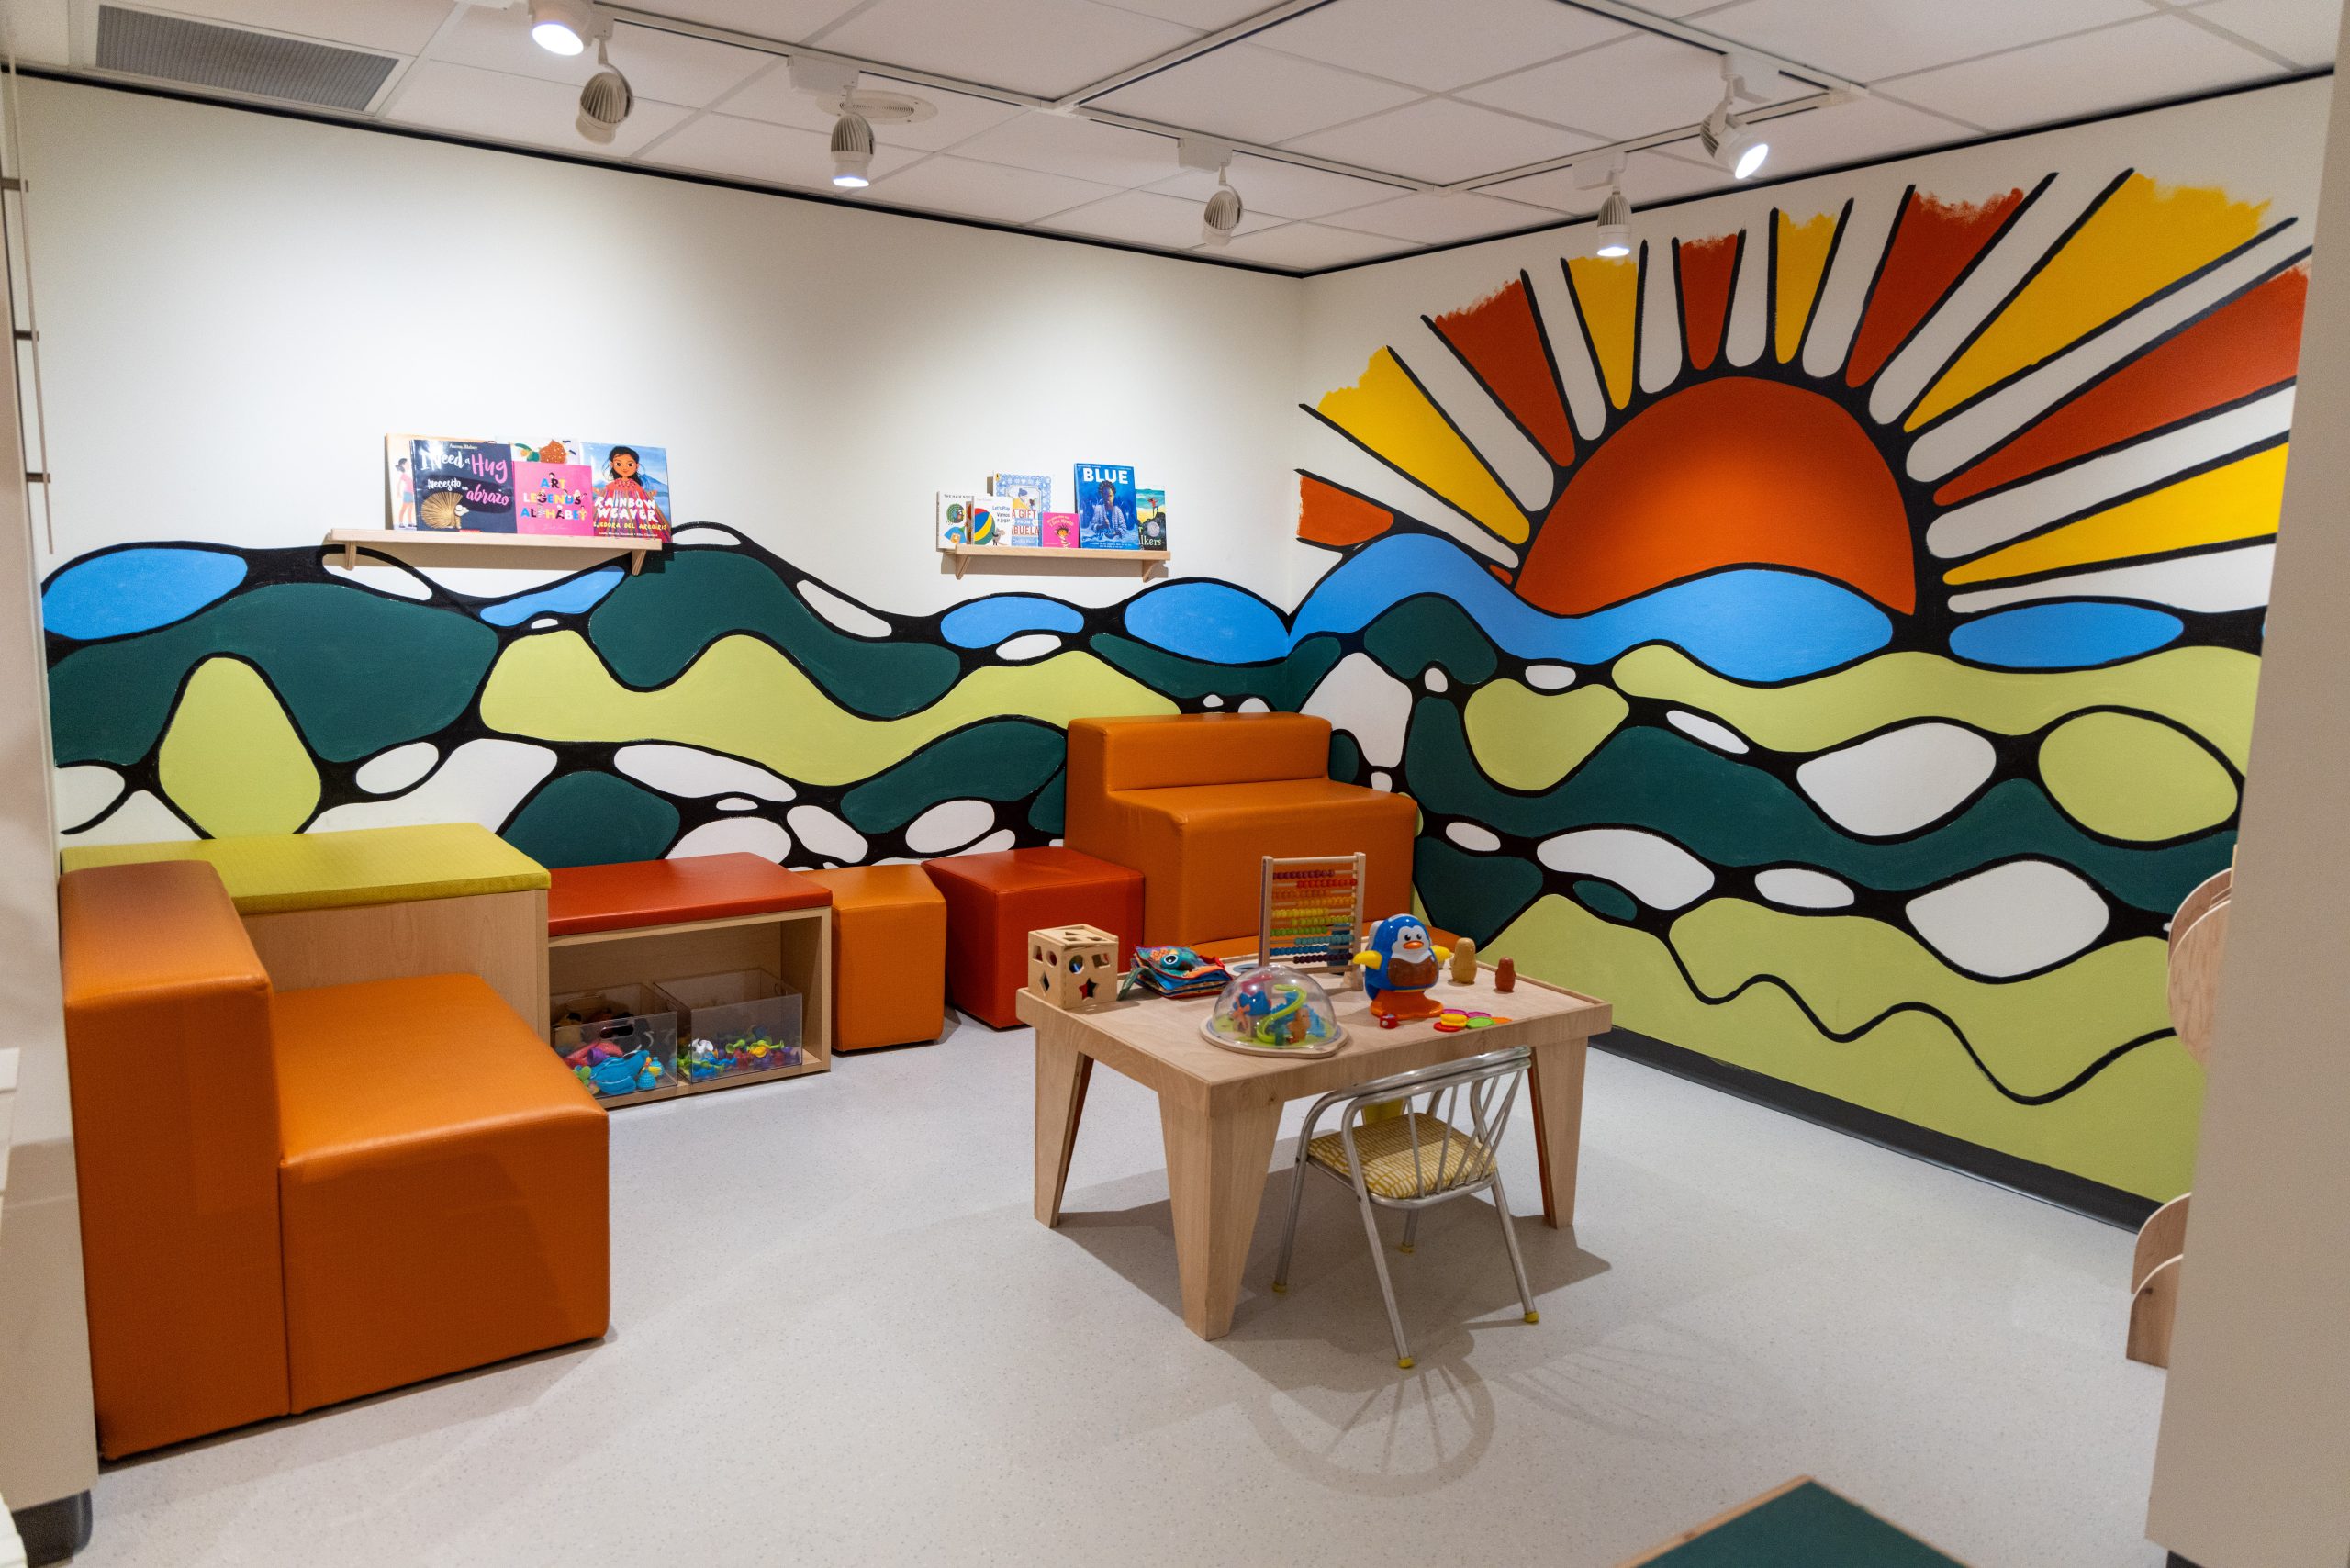 Image of a sunset mural painted on the wall in the Art Park space.